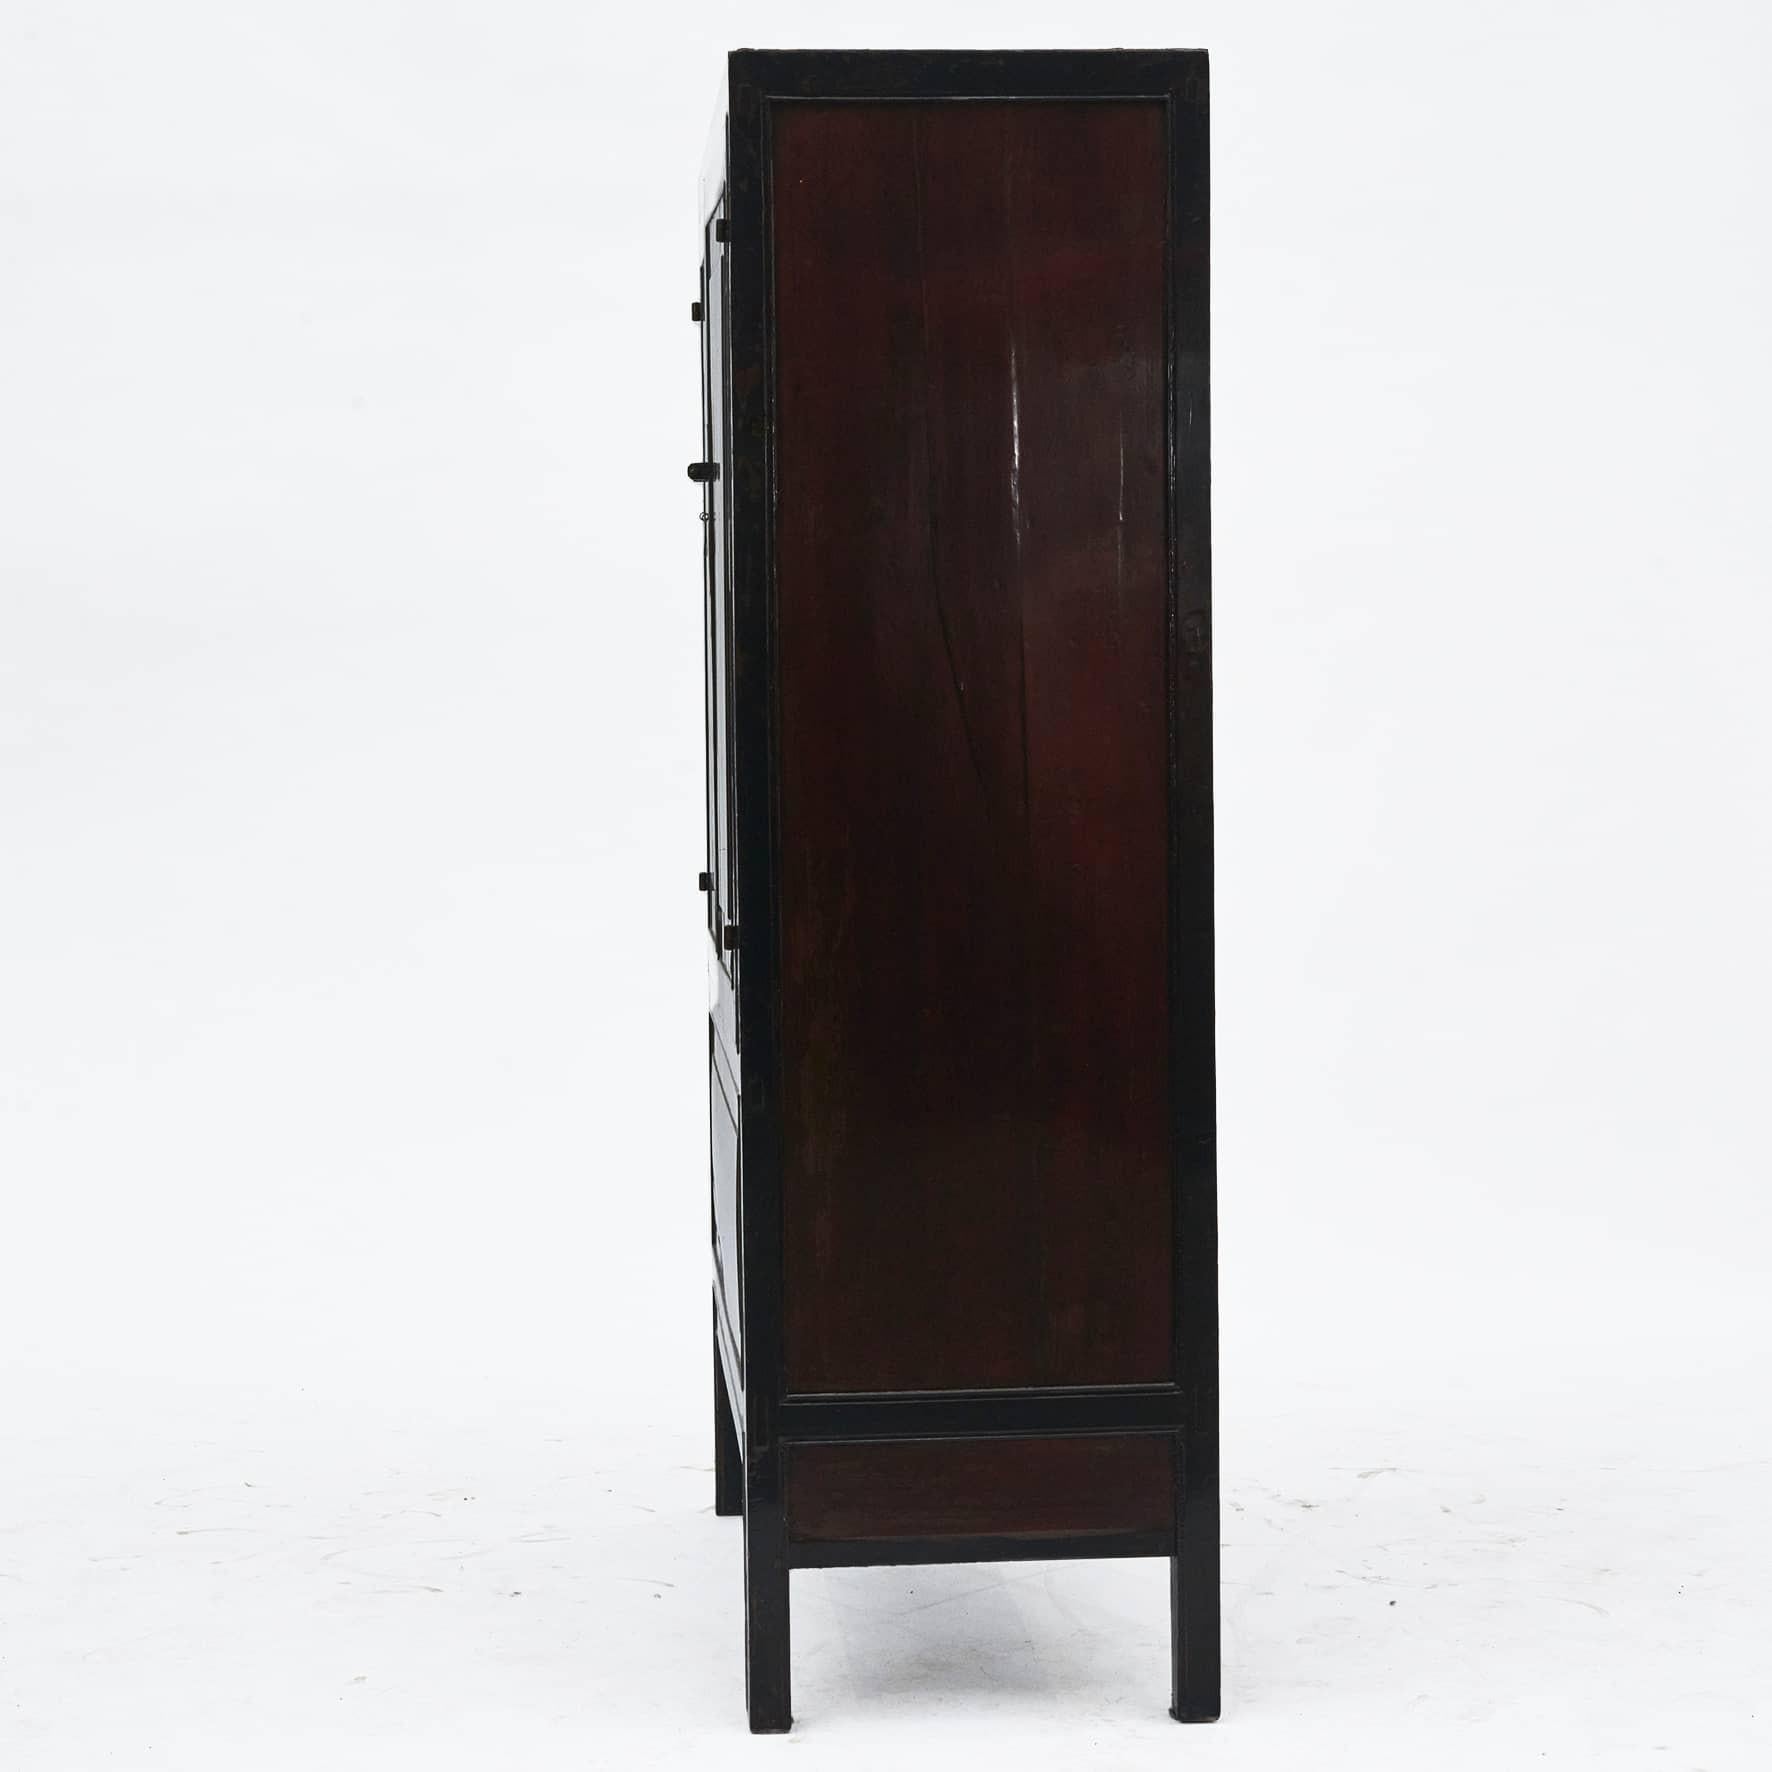 Original Decorated Cabinet, from Fujian Province 1860 - 1880 For Sale 1